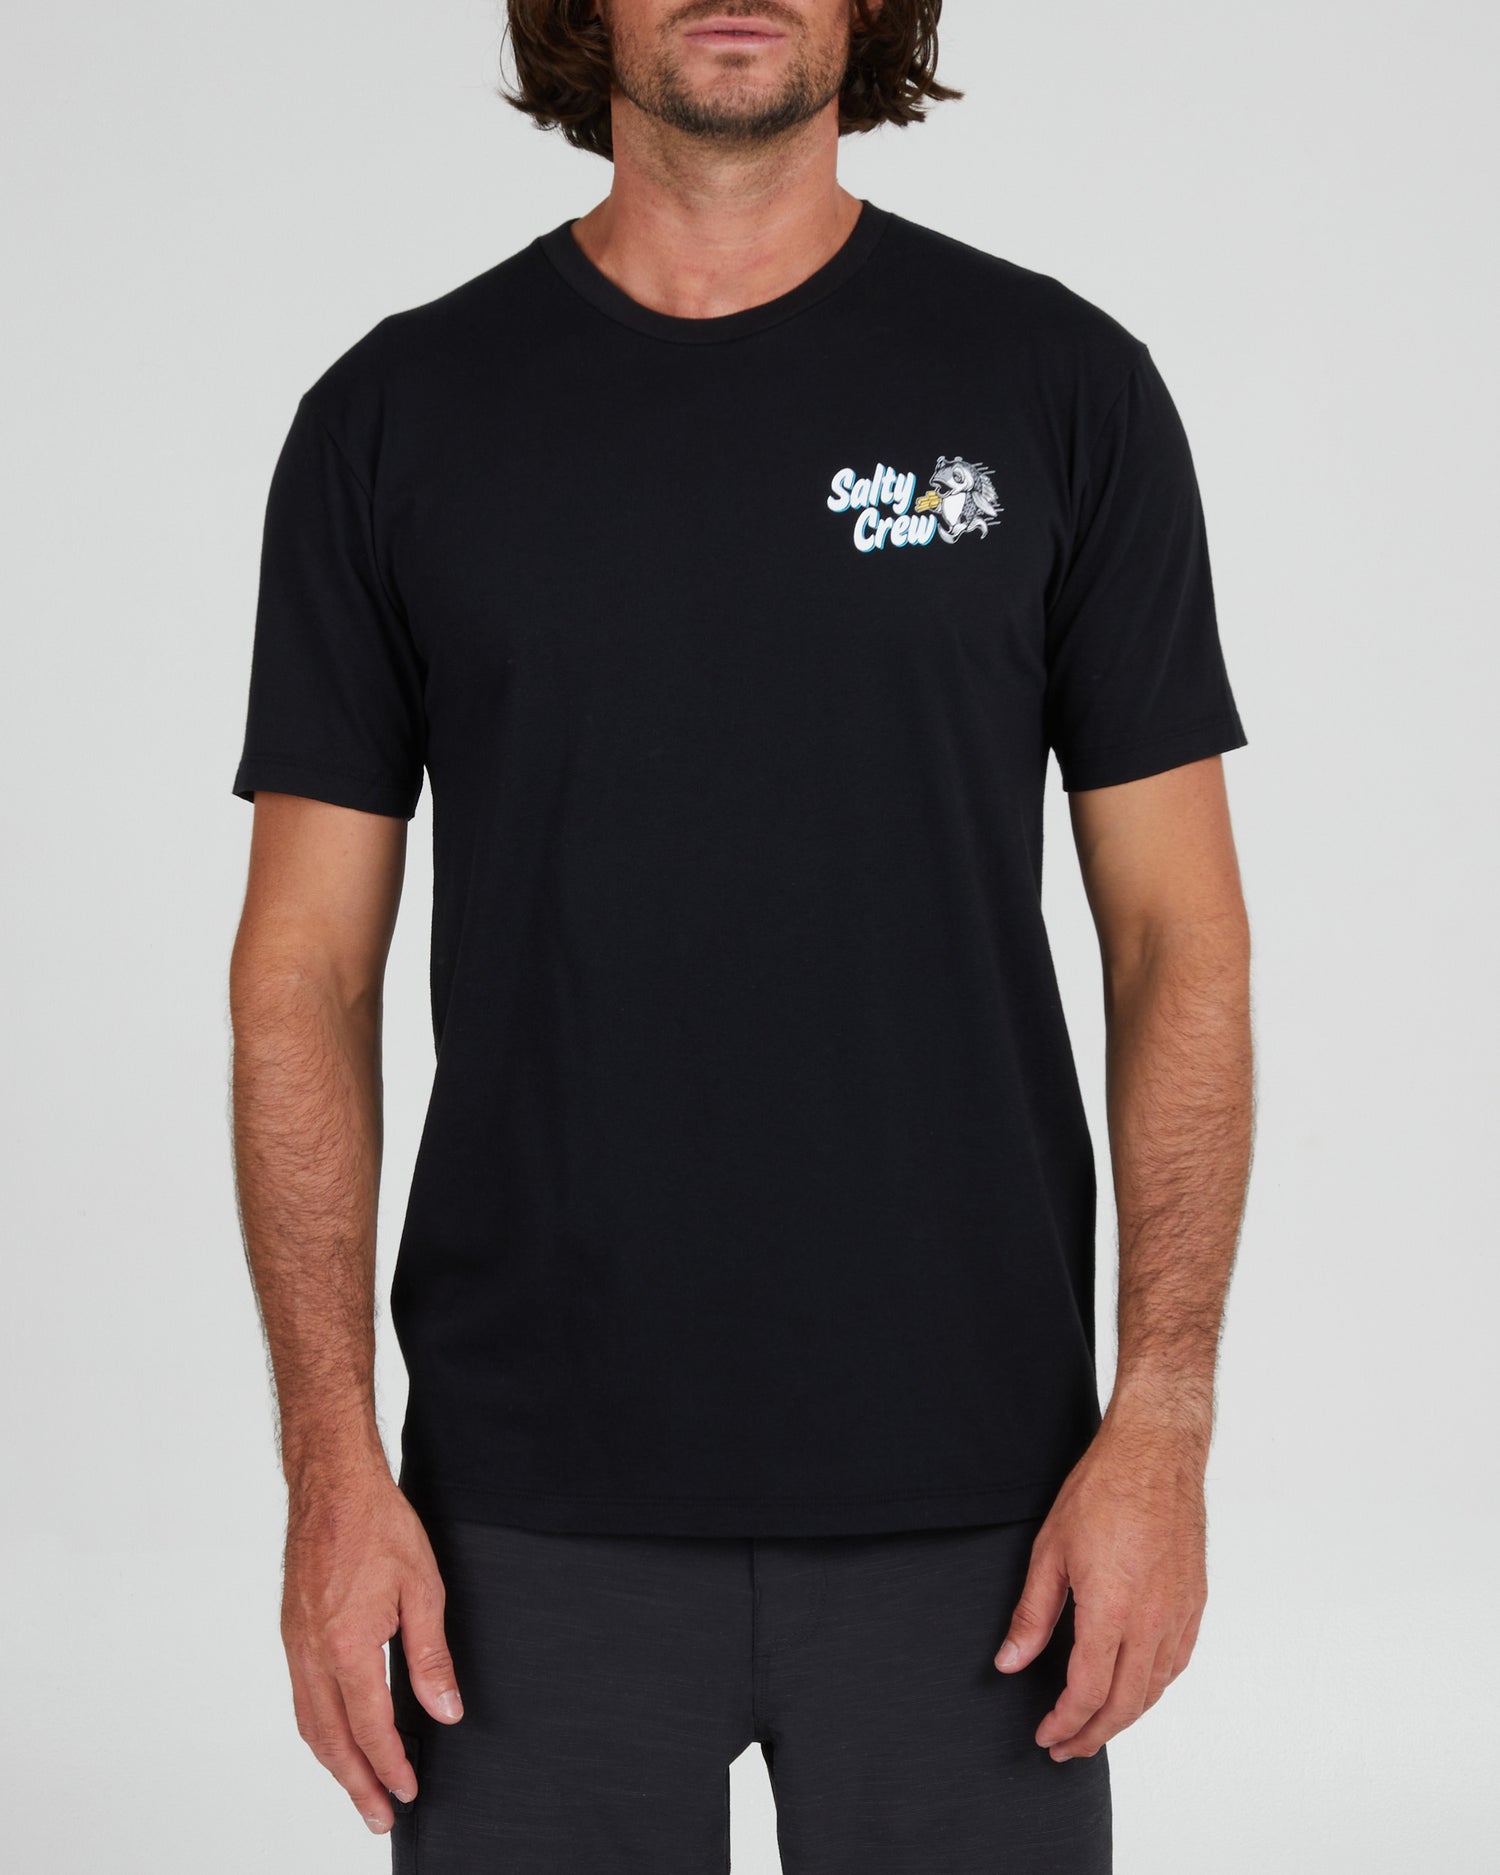 On body front of the Fish and Chips Black S/S Premium Tee